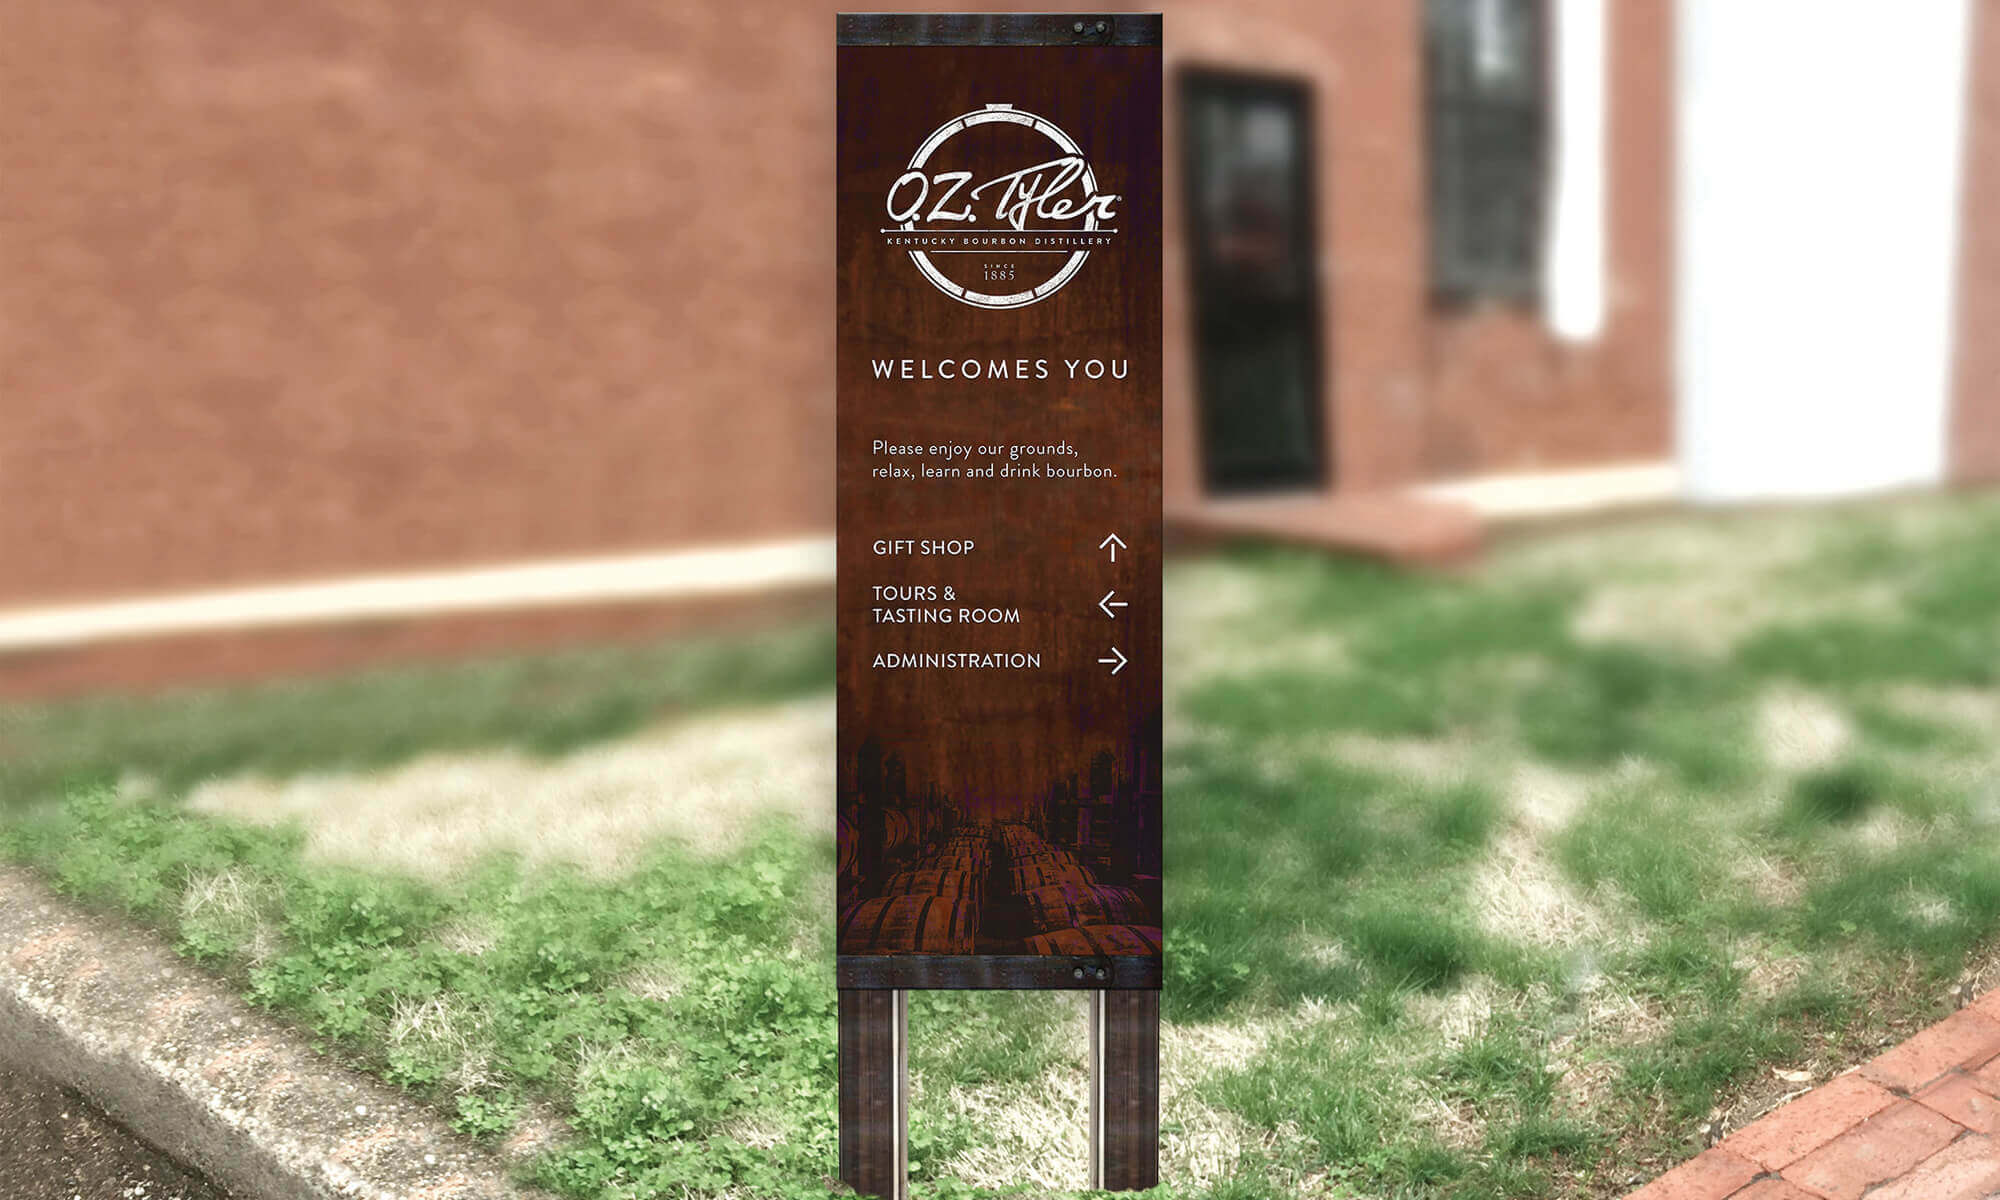 OZ Tyler free standing wayfinding weathered metal with oak barrel imagery that features logo and arrows pointing to gift shop, tours and administration